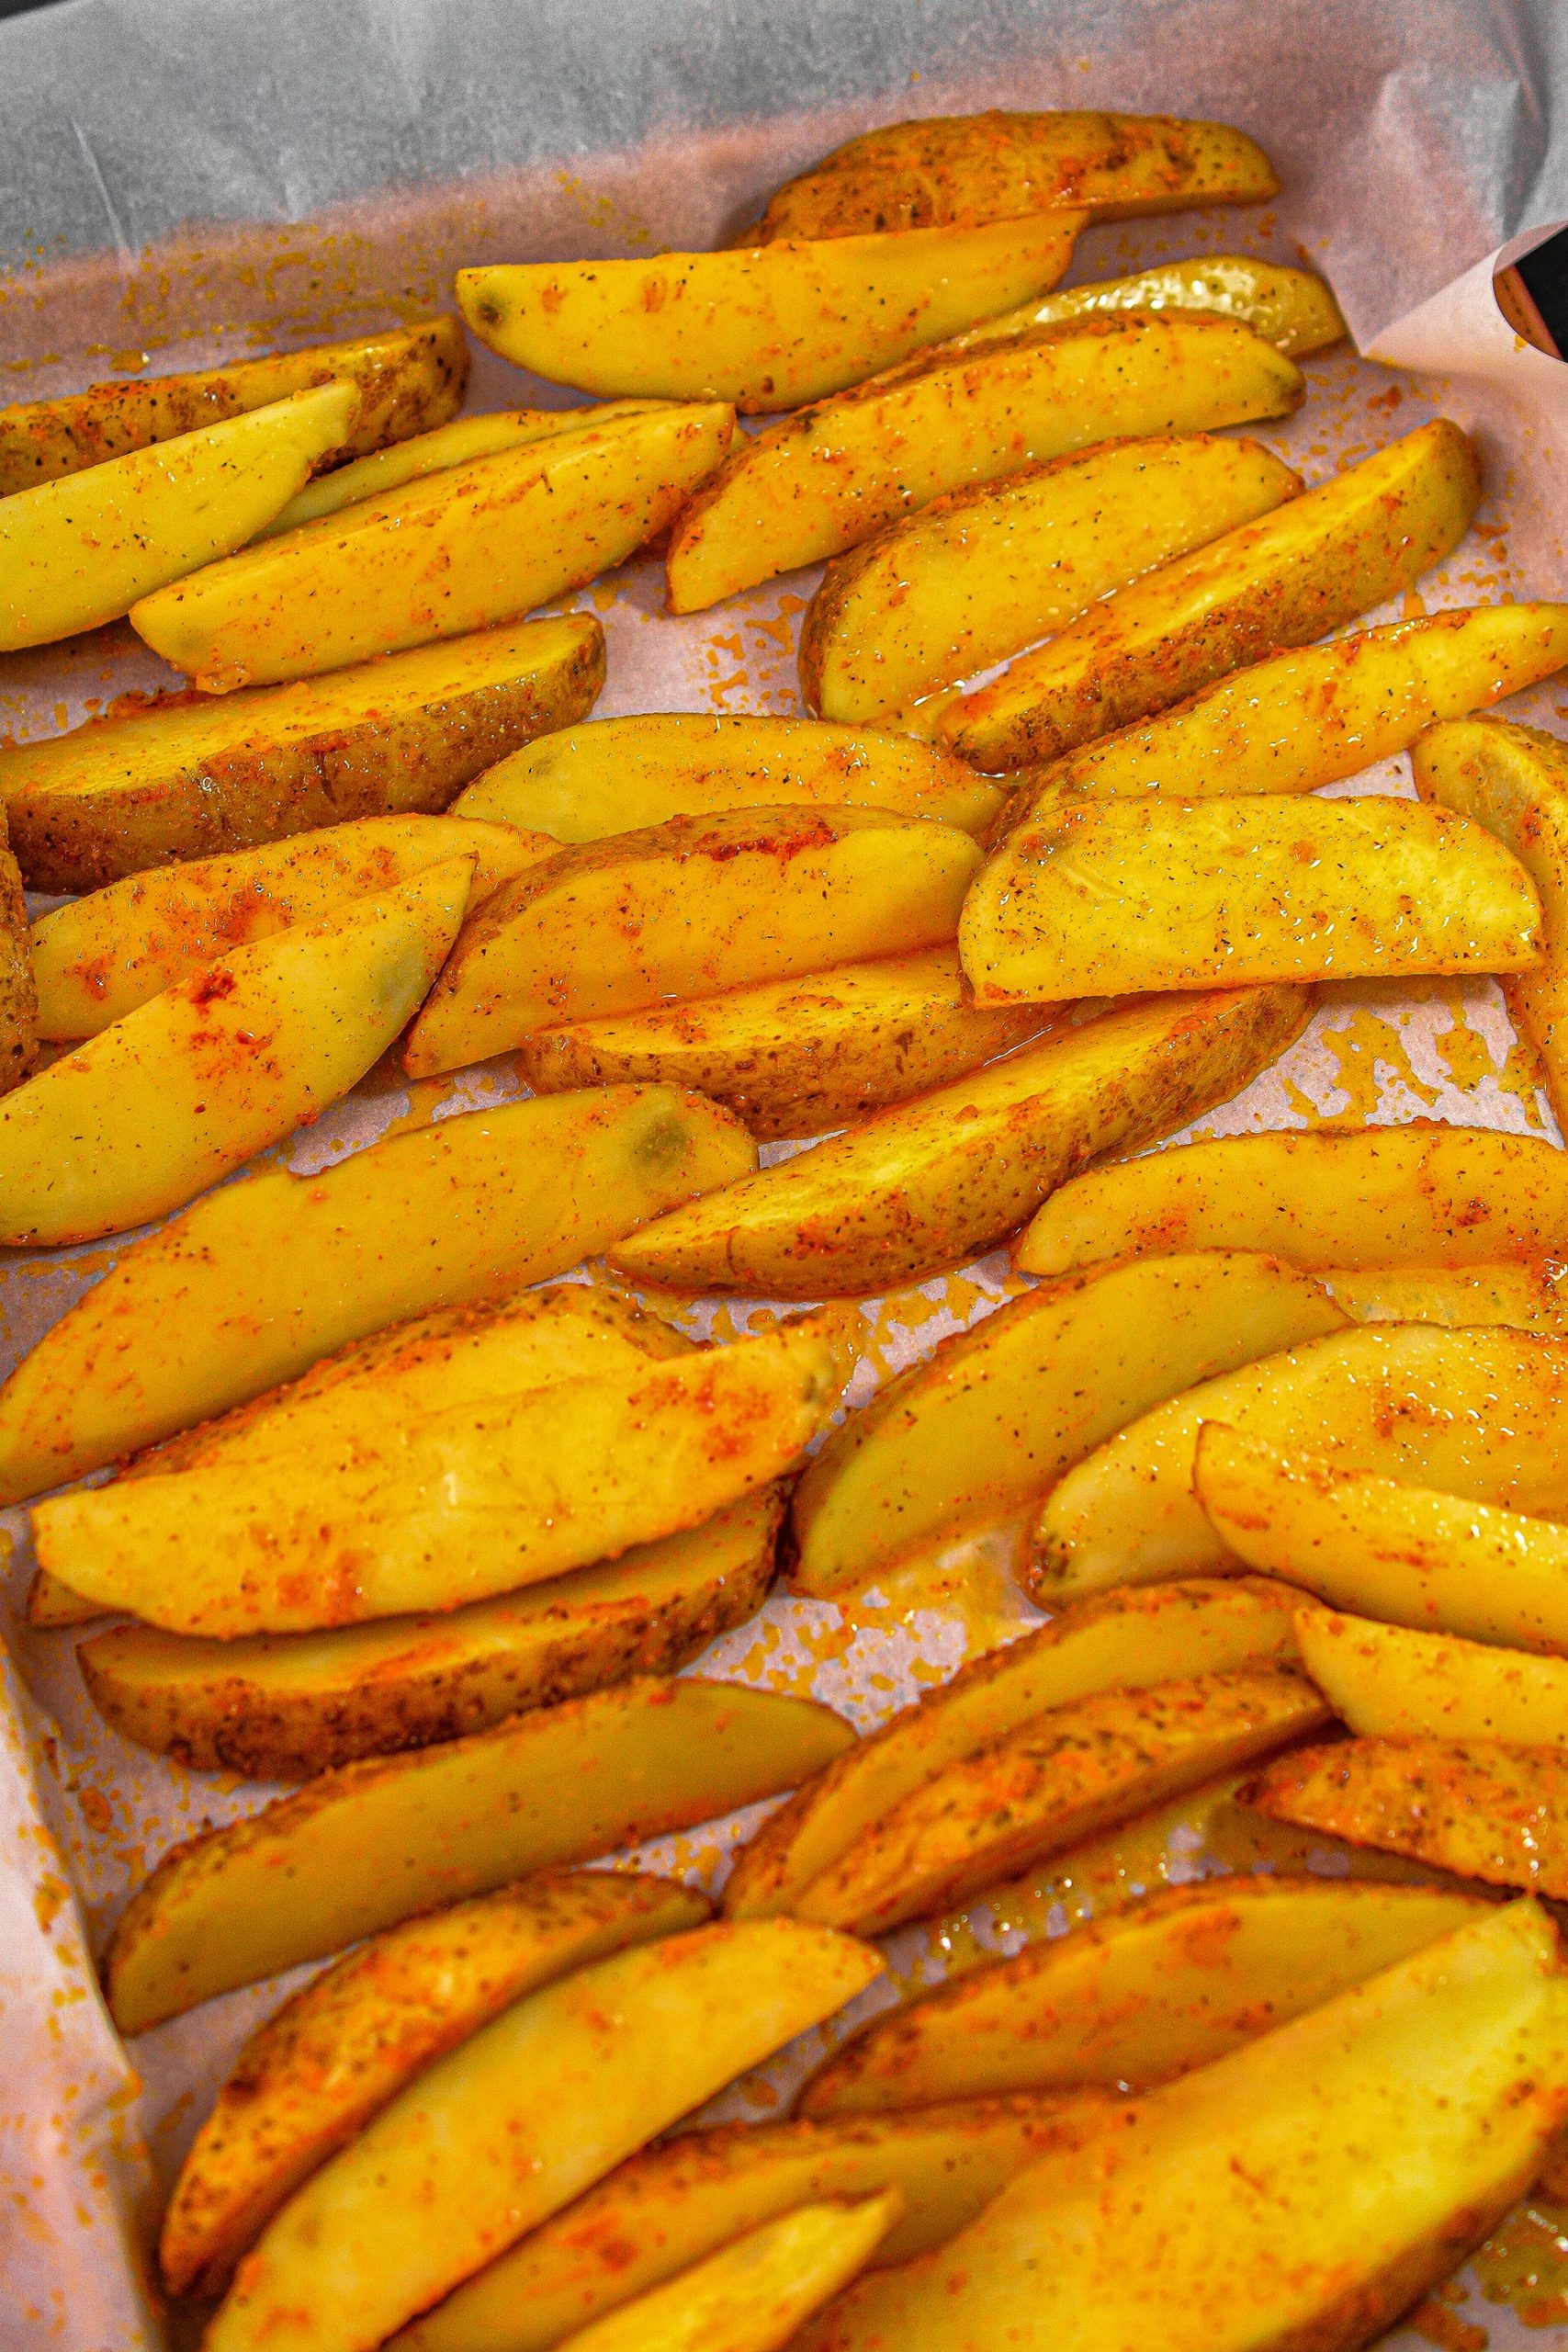 Spread the potato wedges on a parchment-lined baking sheet and bake for 30 minutes.